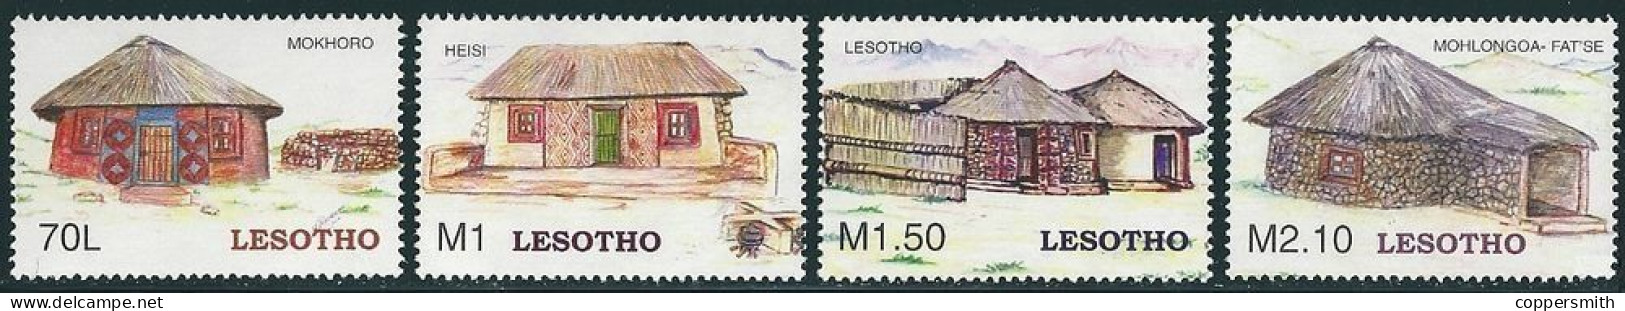 (022) Lesotho  2005 / Culture / Traditional Houses / Häuser / Edifices  ** / Mnh   Michel 1918-21 - Lesotho (1966-...)